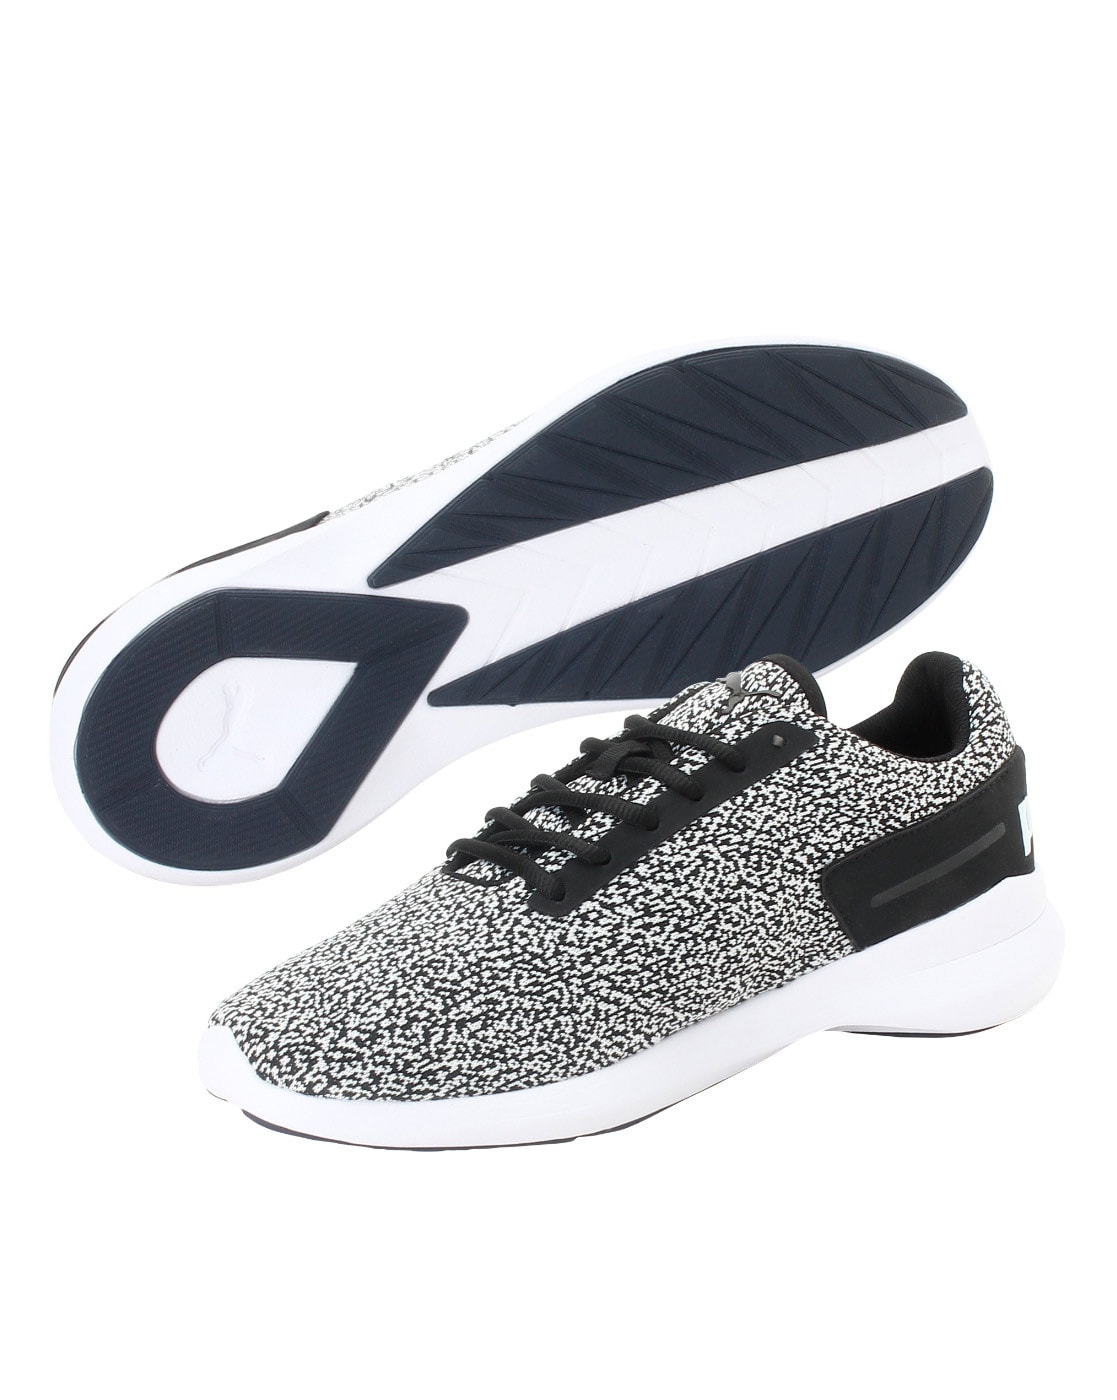 puma casual shoes for men with price